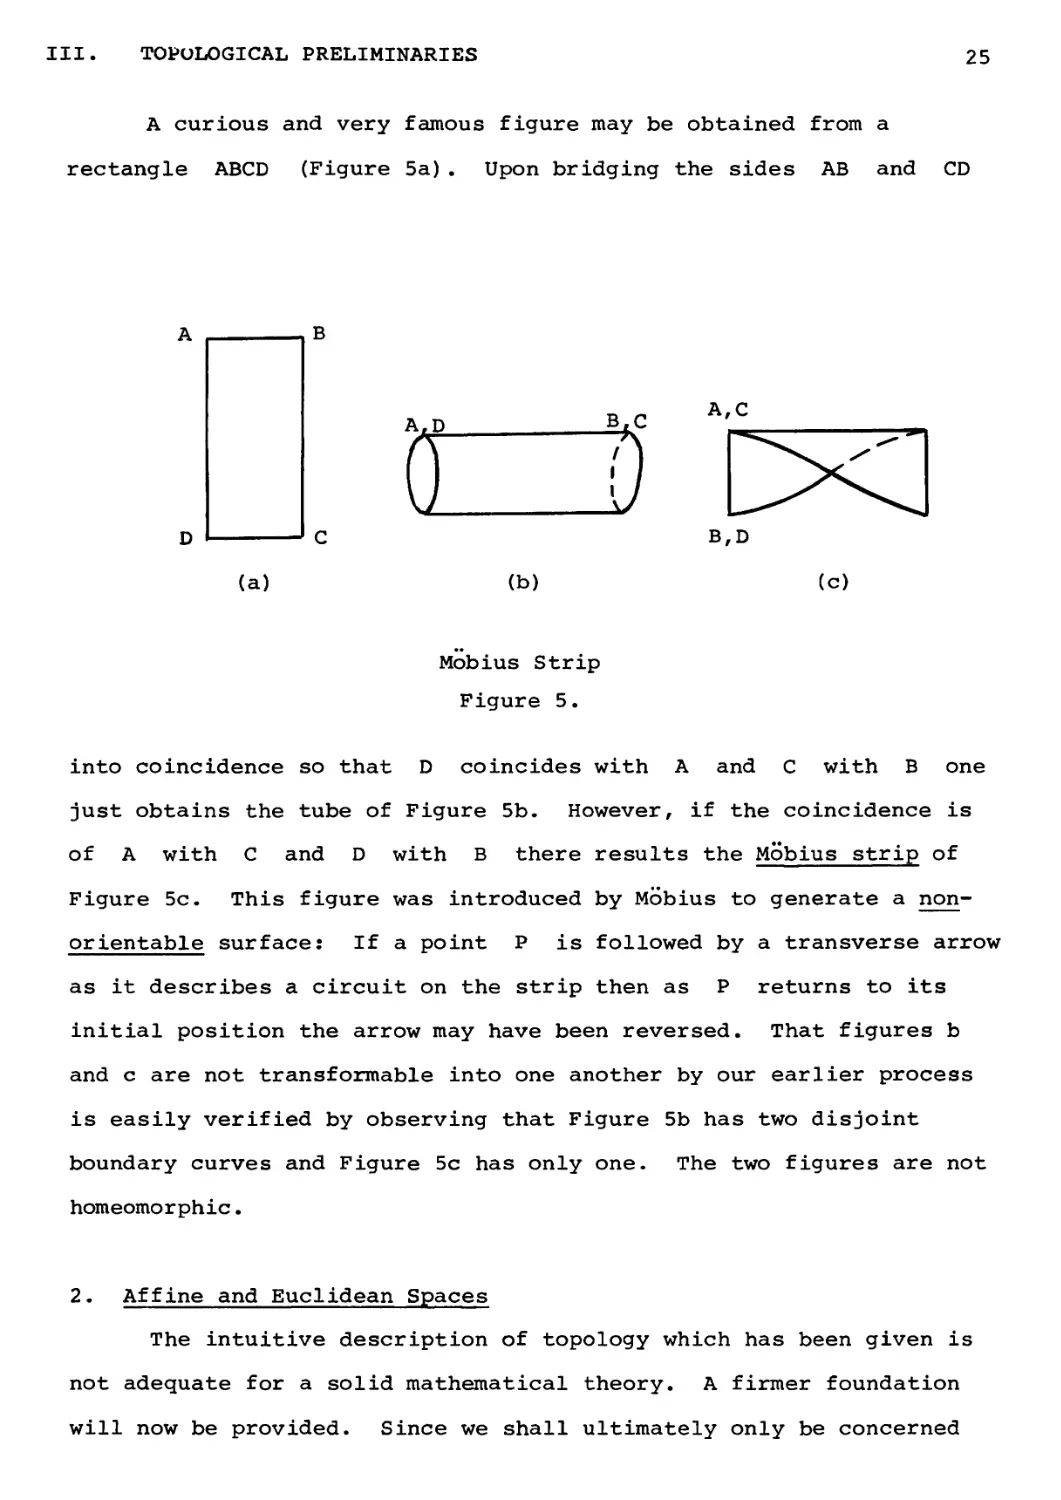 2. Affine and Euclidean Spaces